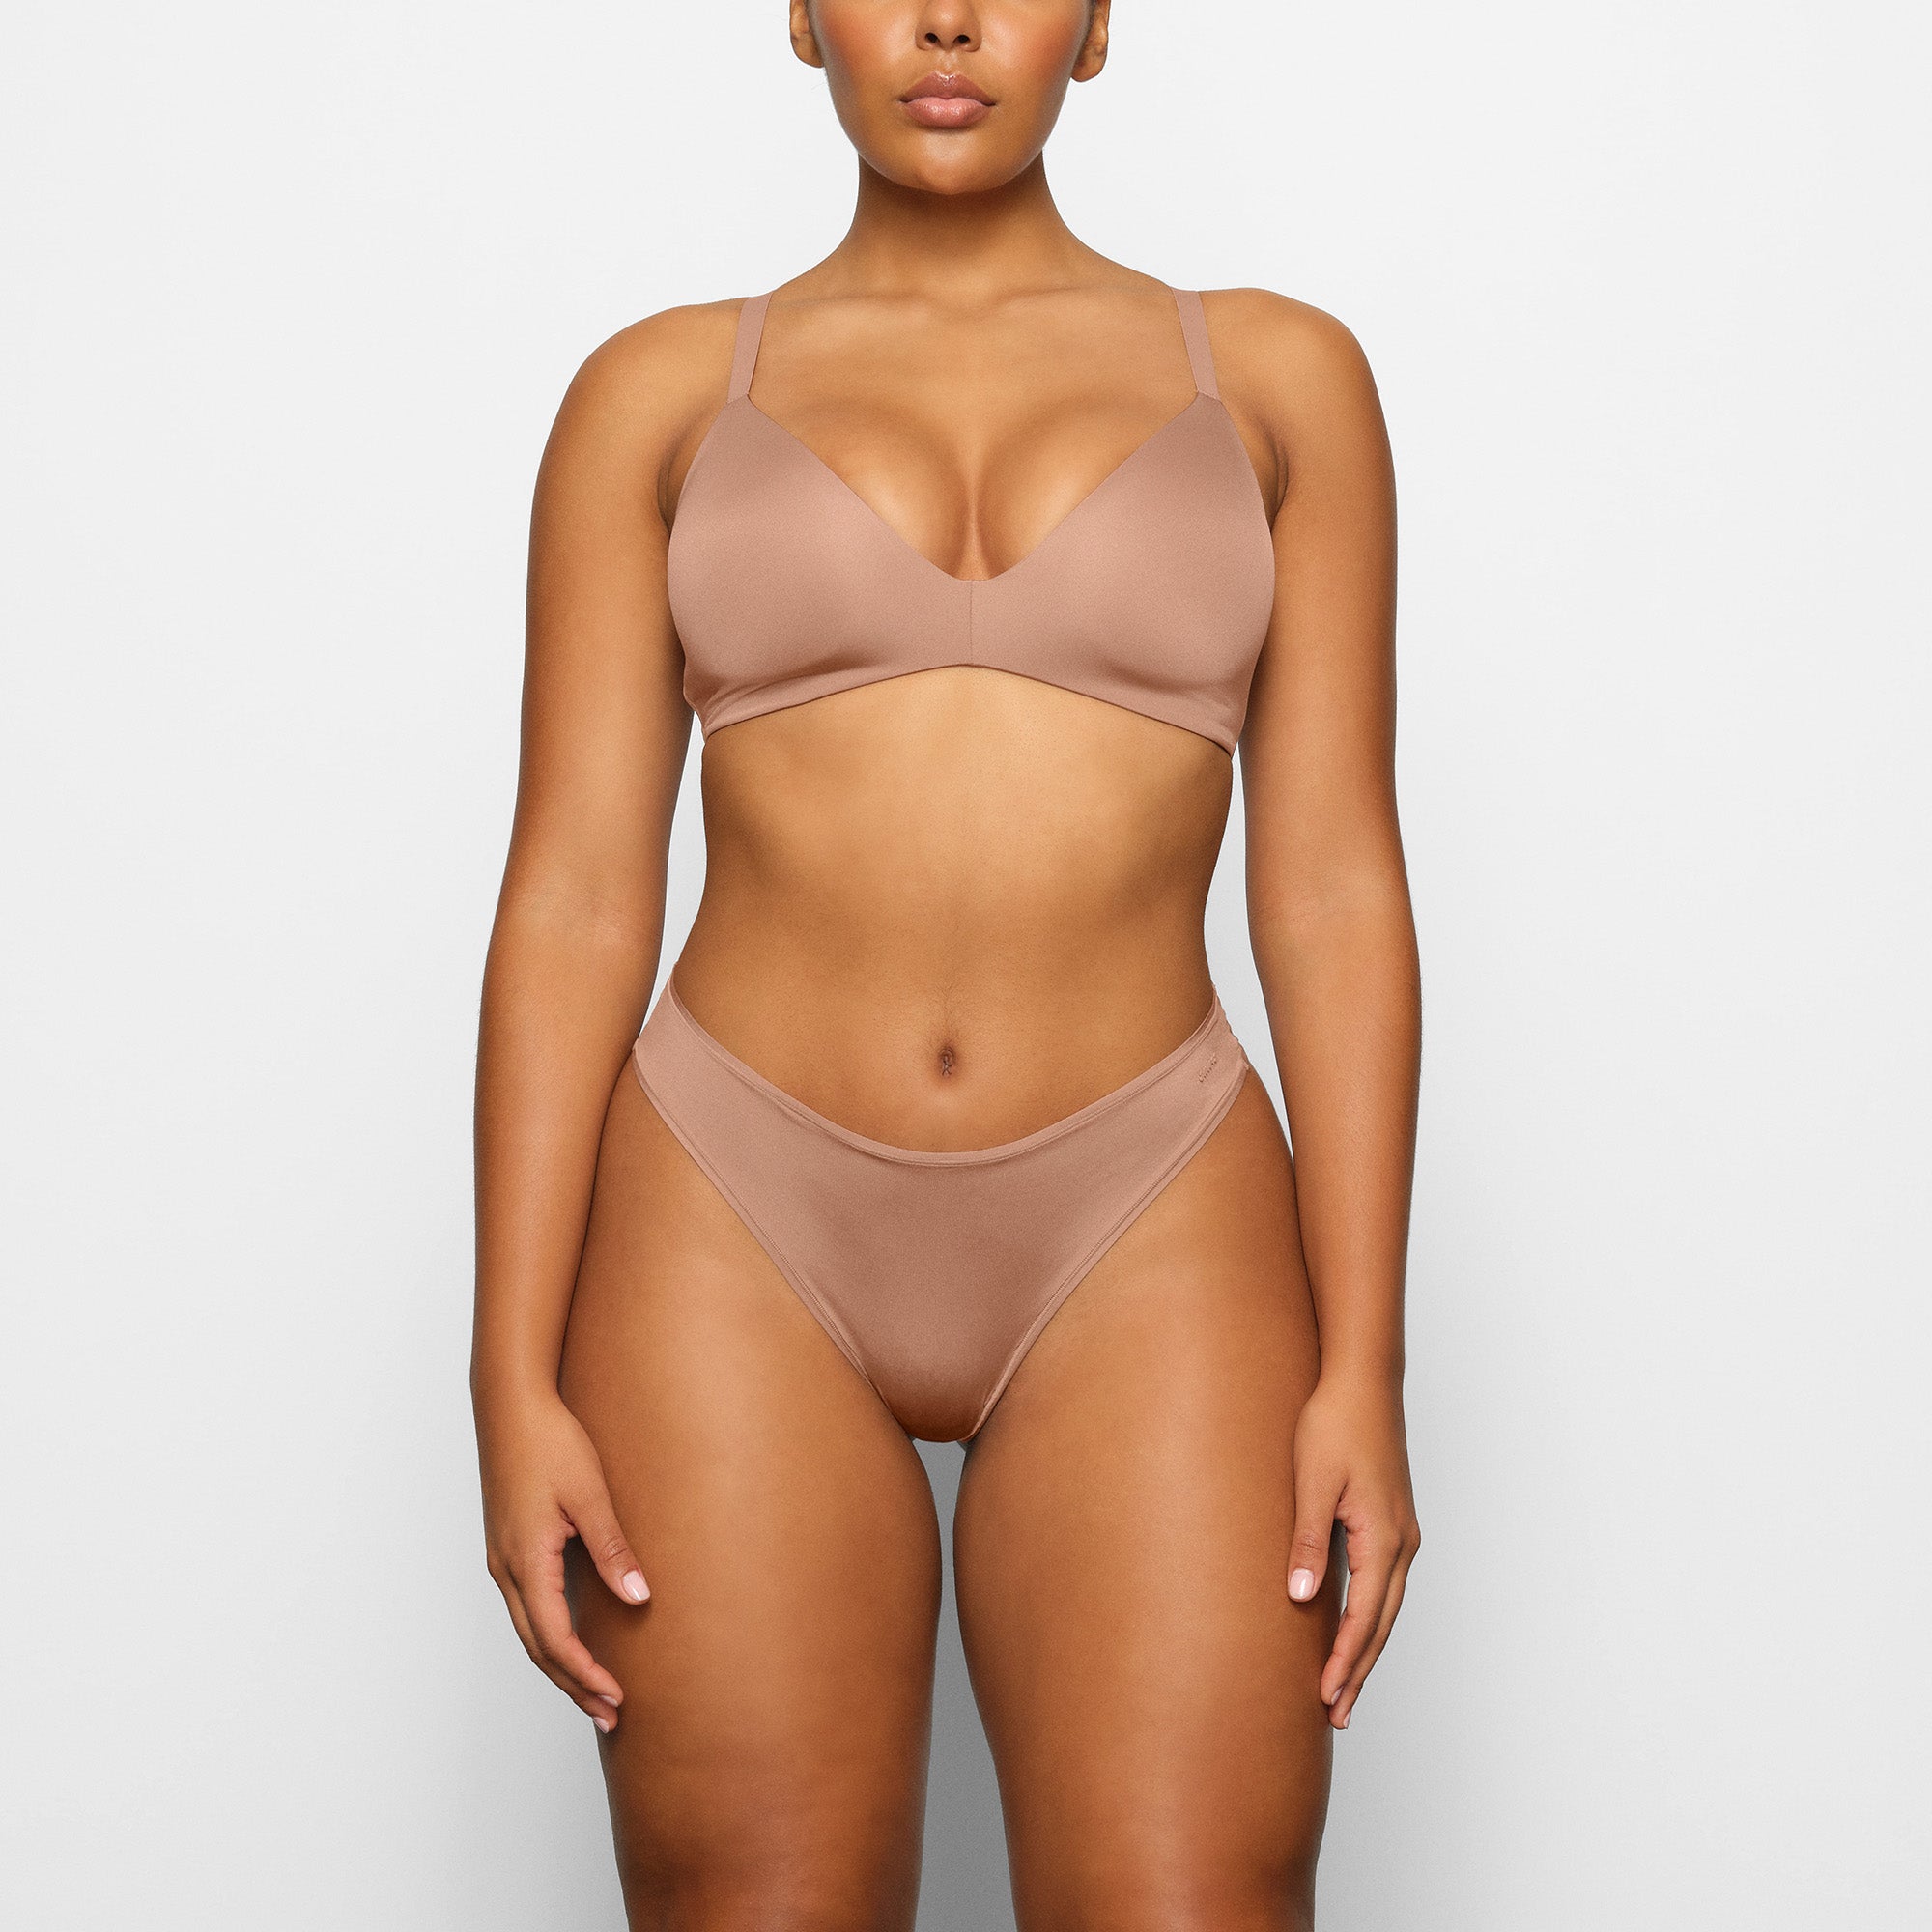 SKIMS NWT 36D Wireless Form T-Shirt Demi Bra Clay Kim K Adjustable Nude  Comfort Size undefined - $25 New With Tags - From Cassandra